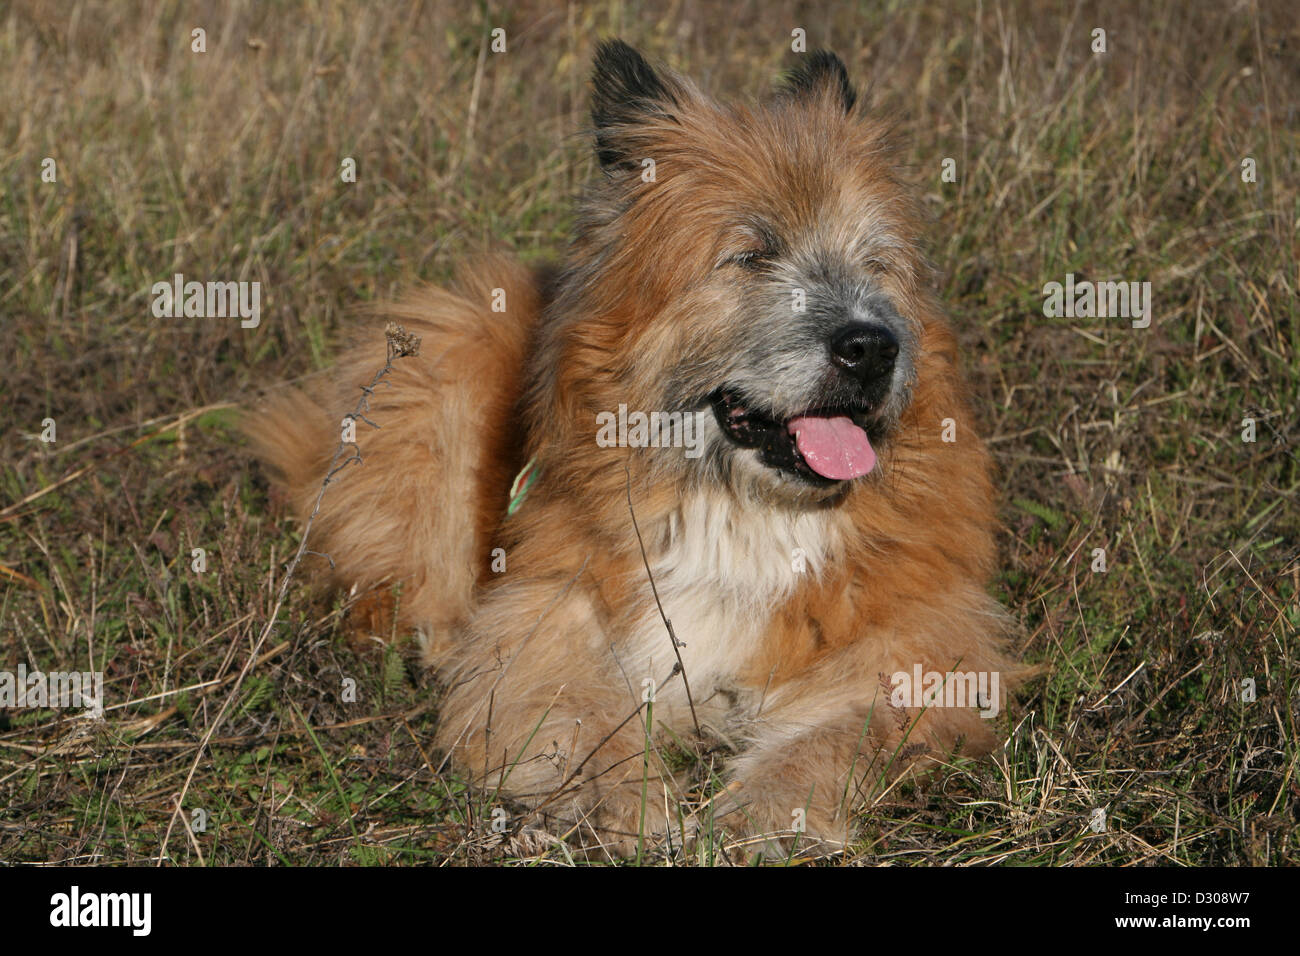 Elo Hund High Resolution Stock Photography and Images - Alamy